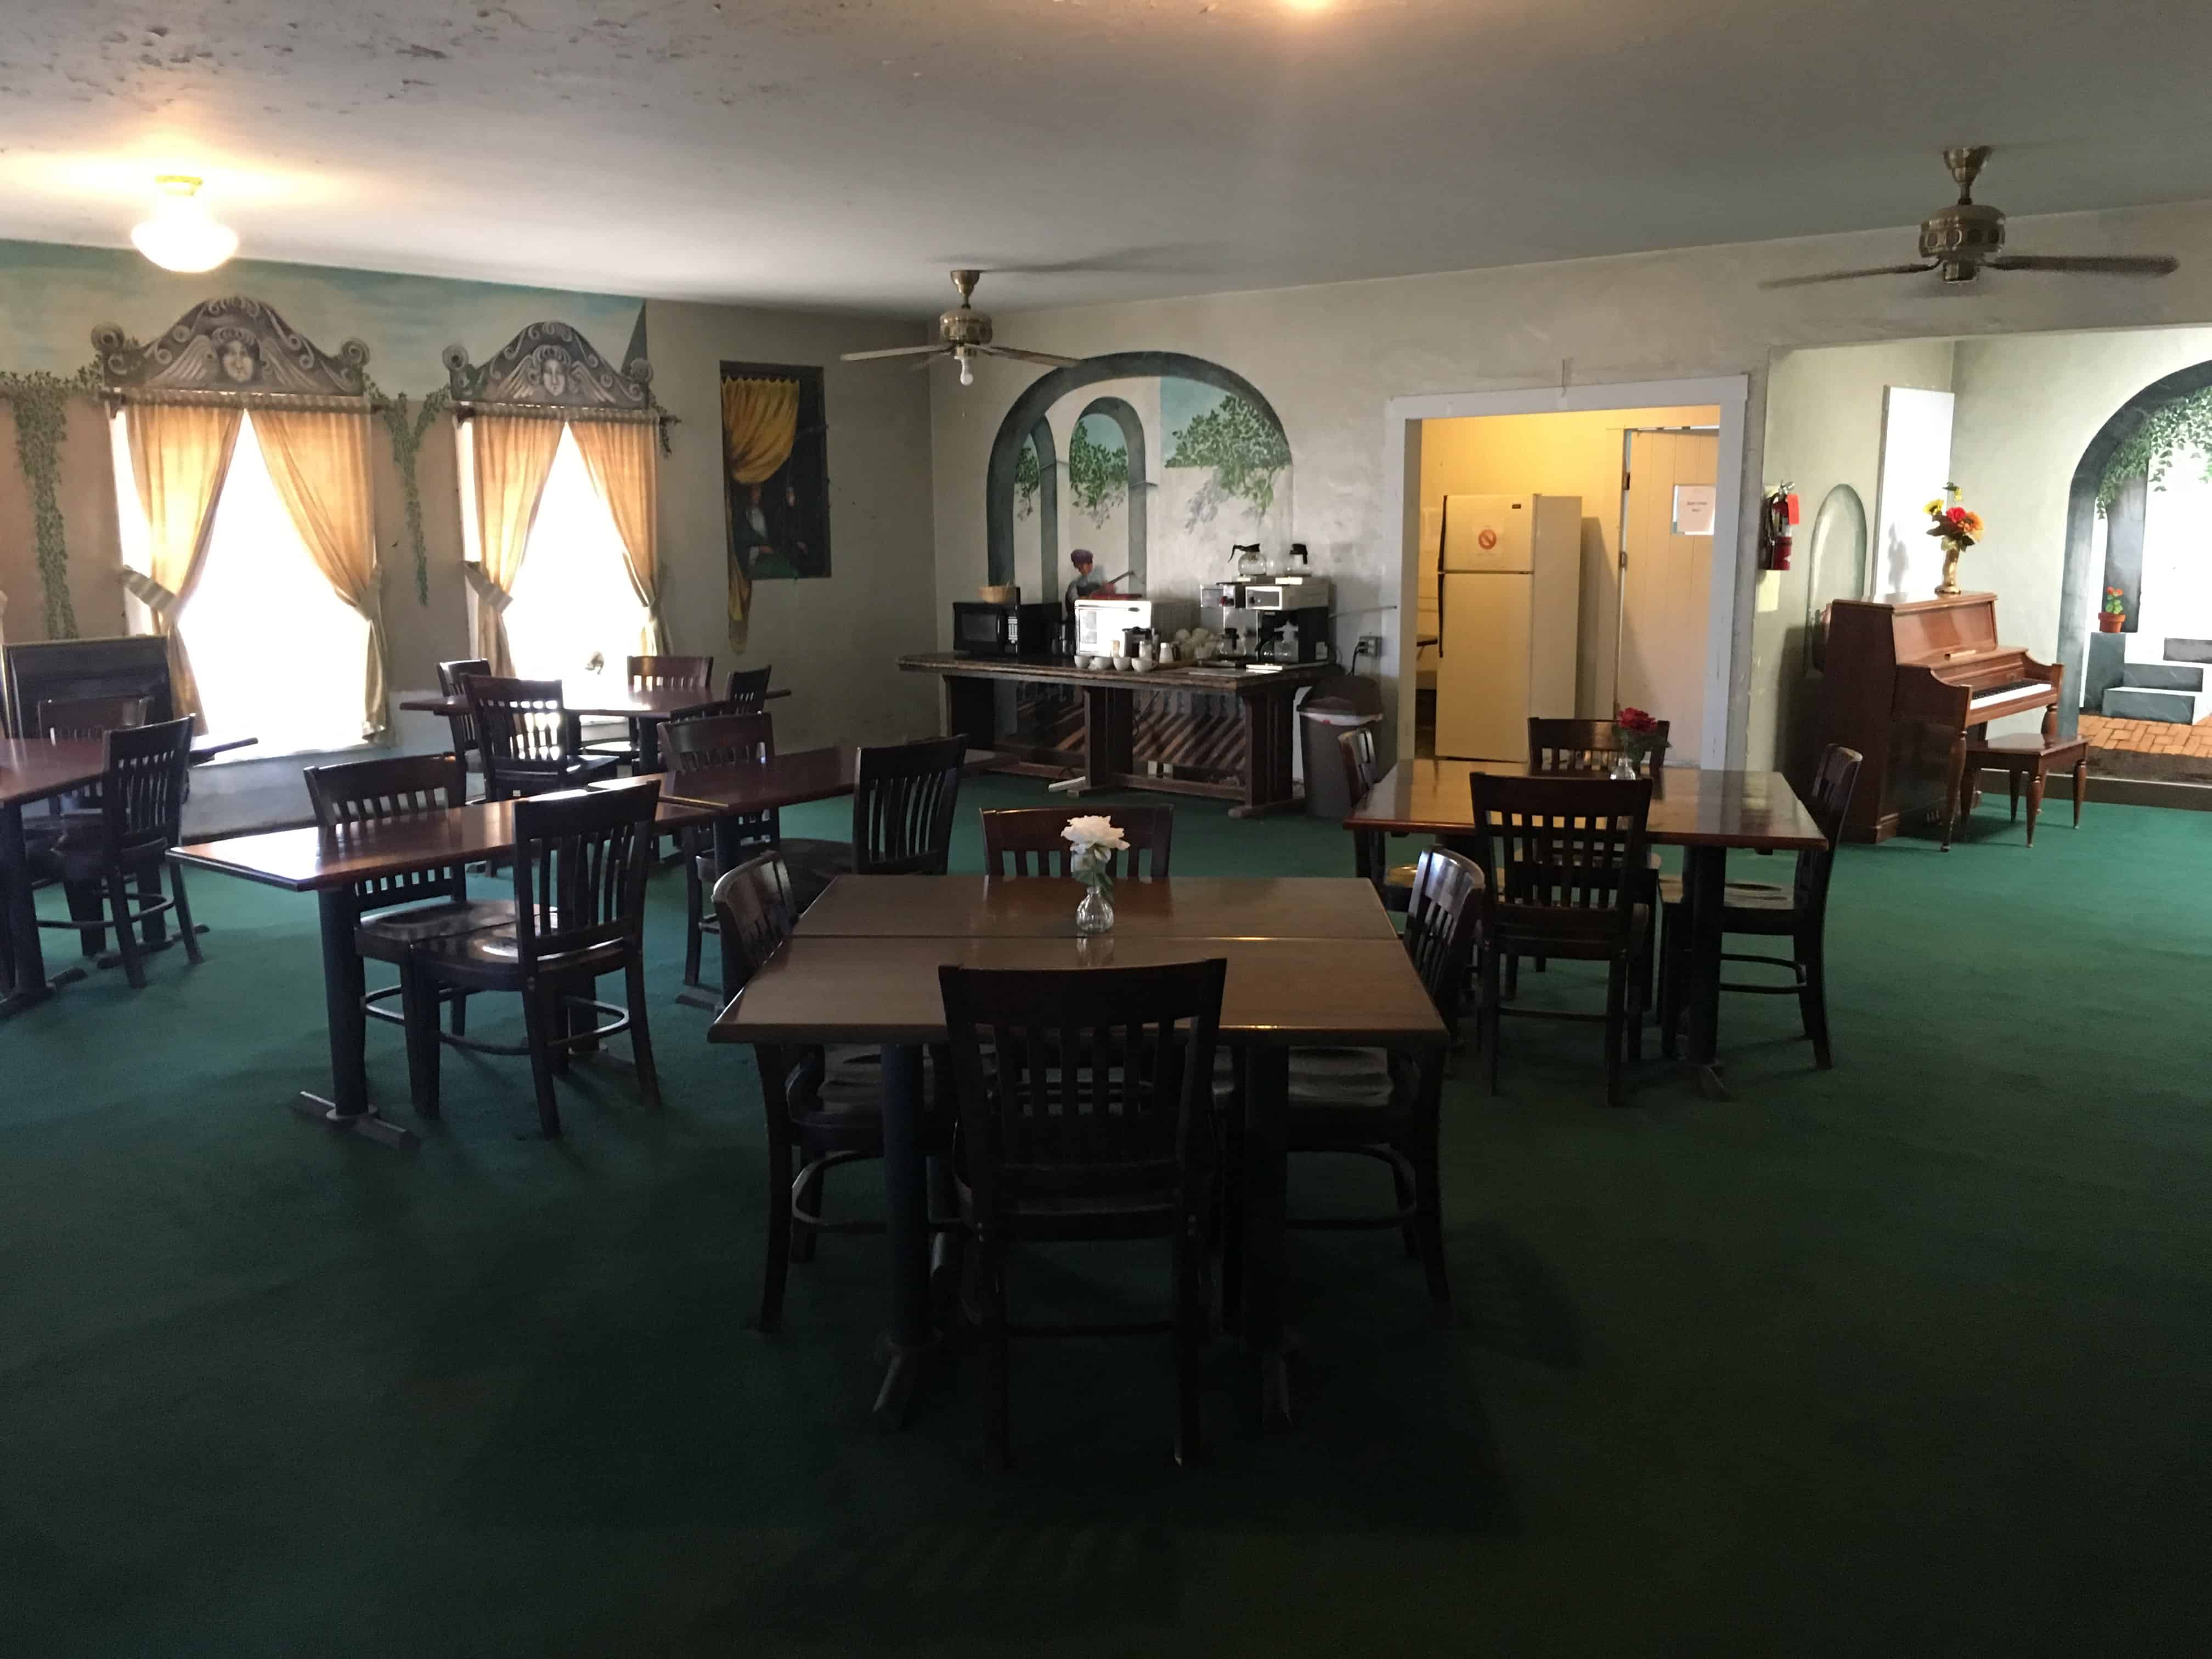 Dining room of the Amargosa Hotel